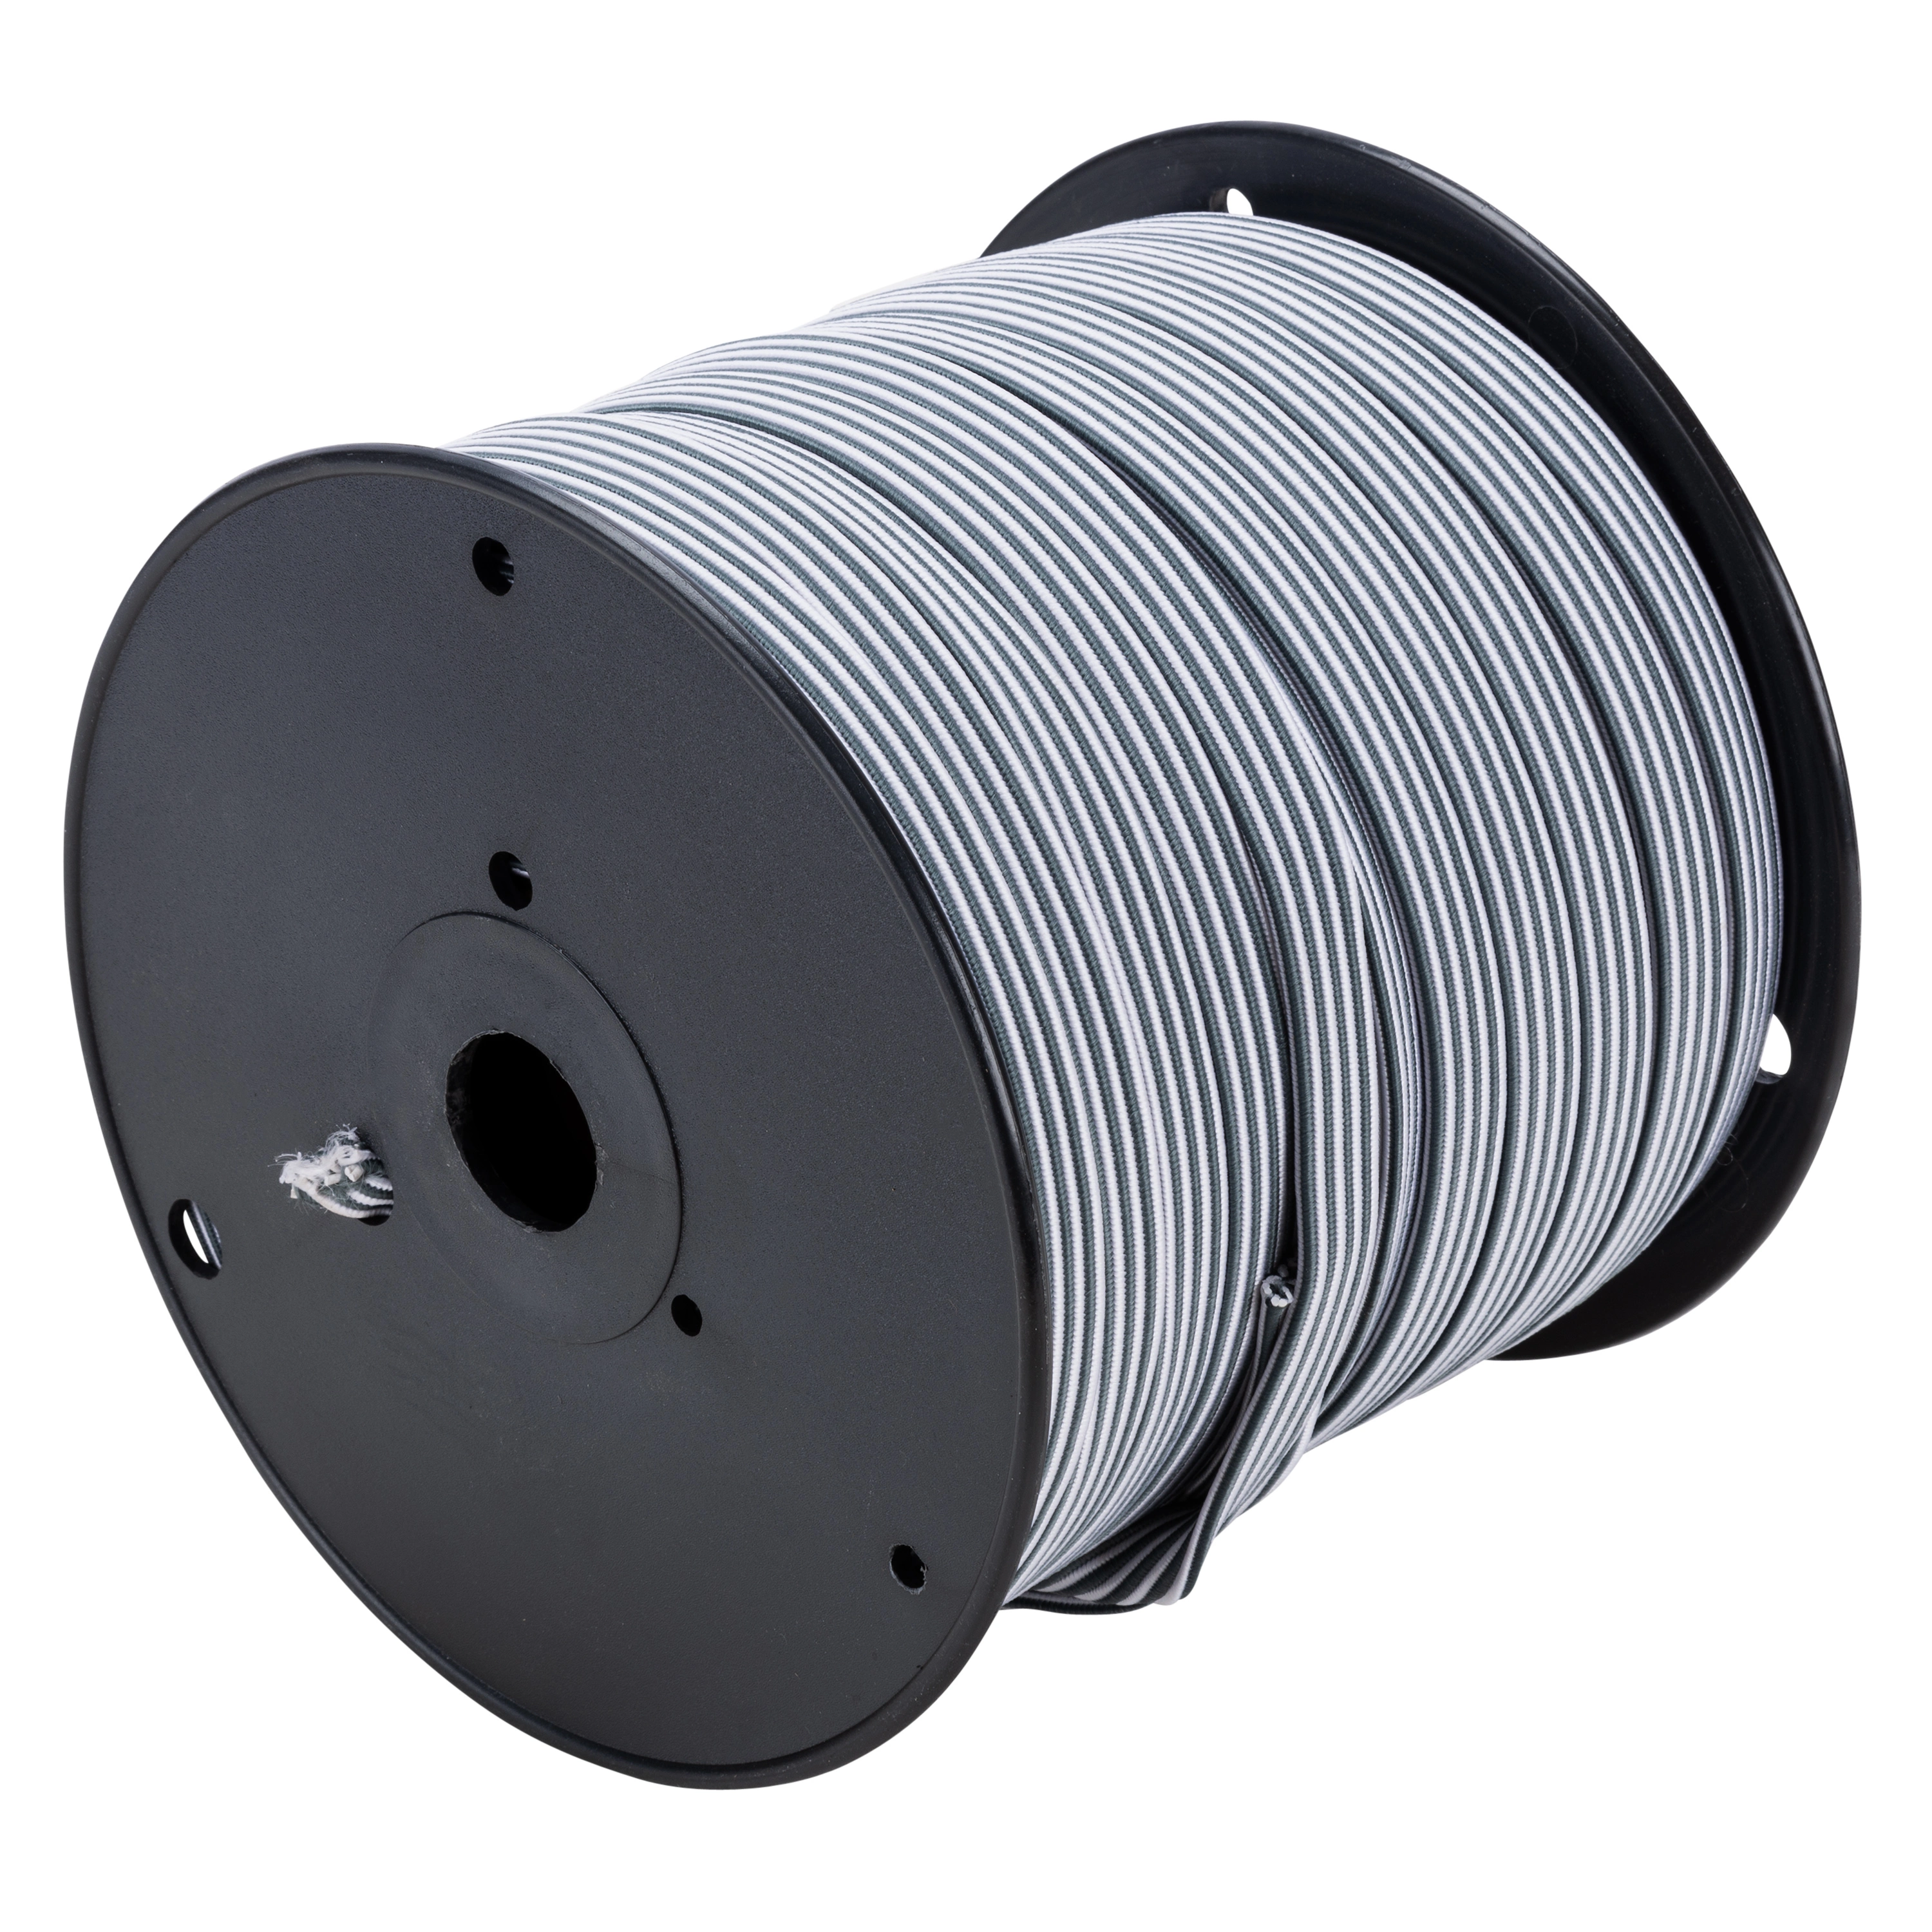 1/2" x 200' Flat Gray with White Stripe Bungee Cord Reel variant image view